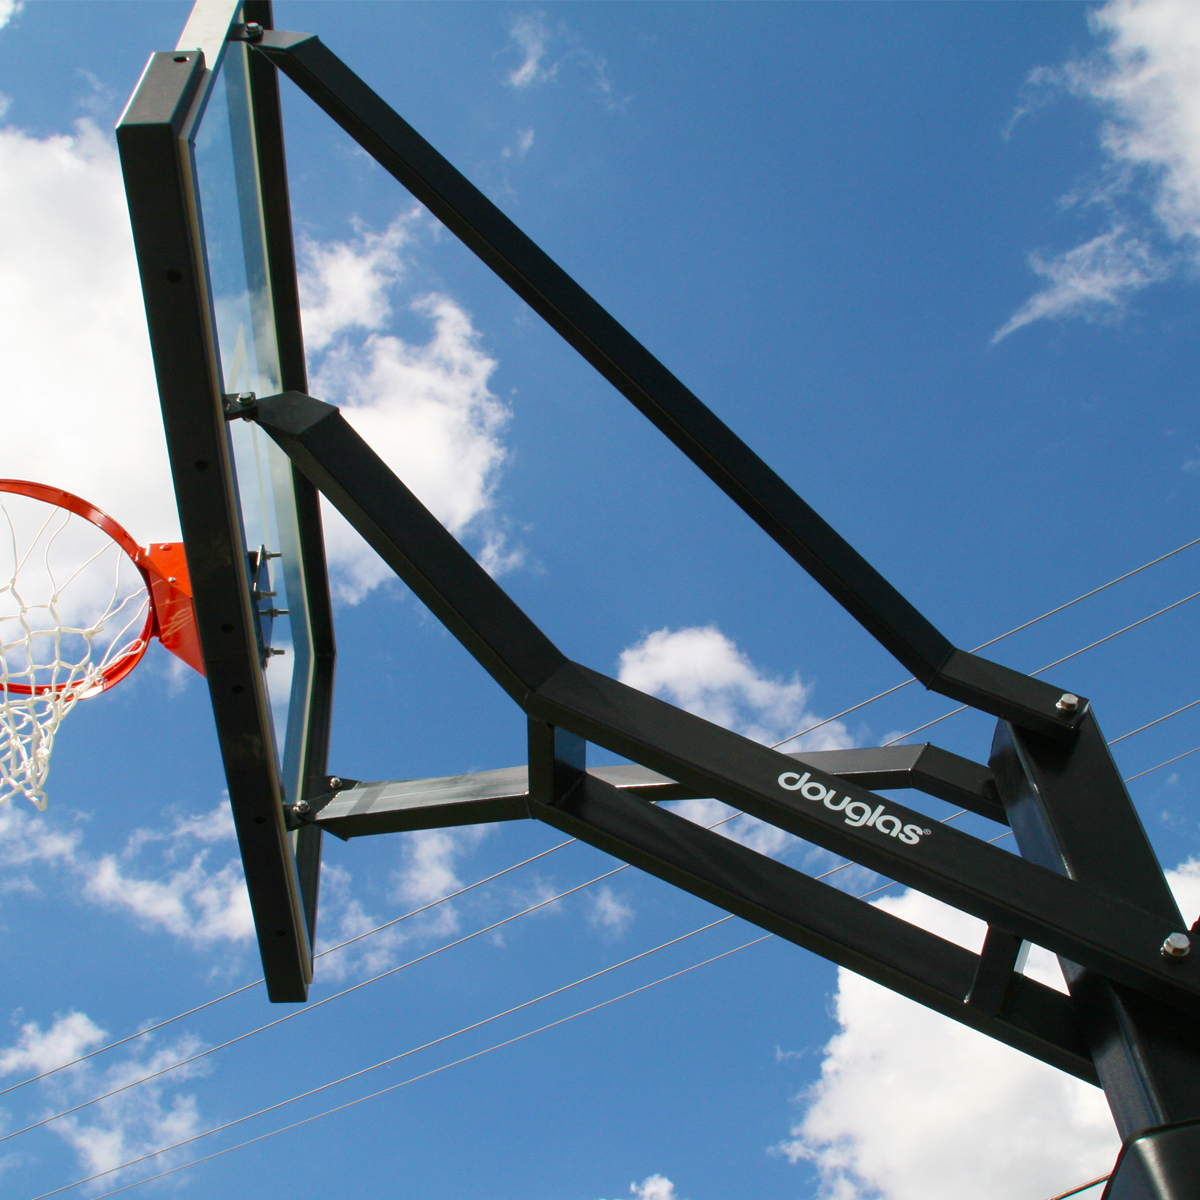 Basketball backboard - All architecture and design manufacturers